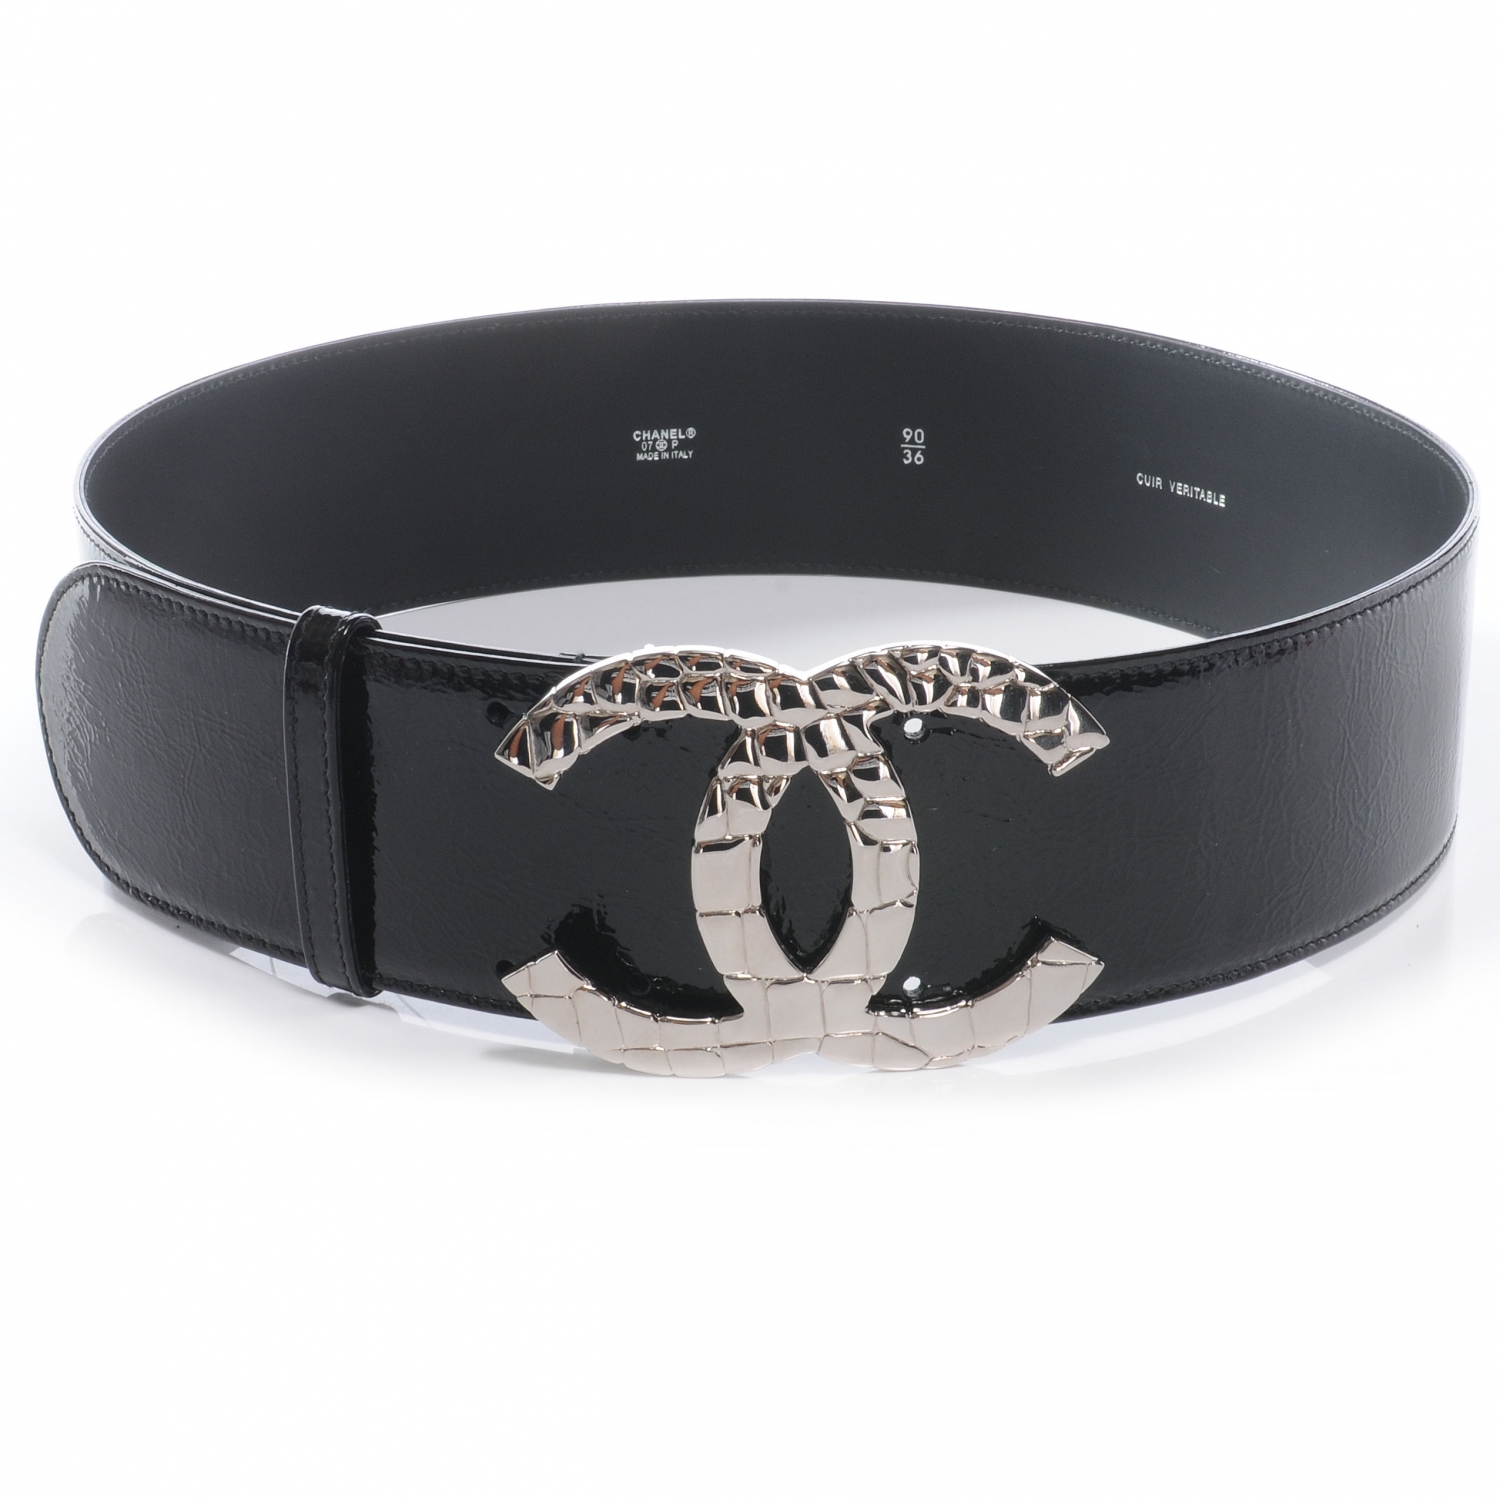 CHANEL Patent Leather Silver CC Buckle Wide Belt 90 36 Black 45484